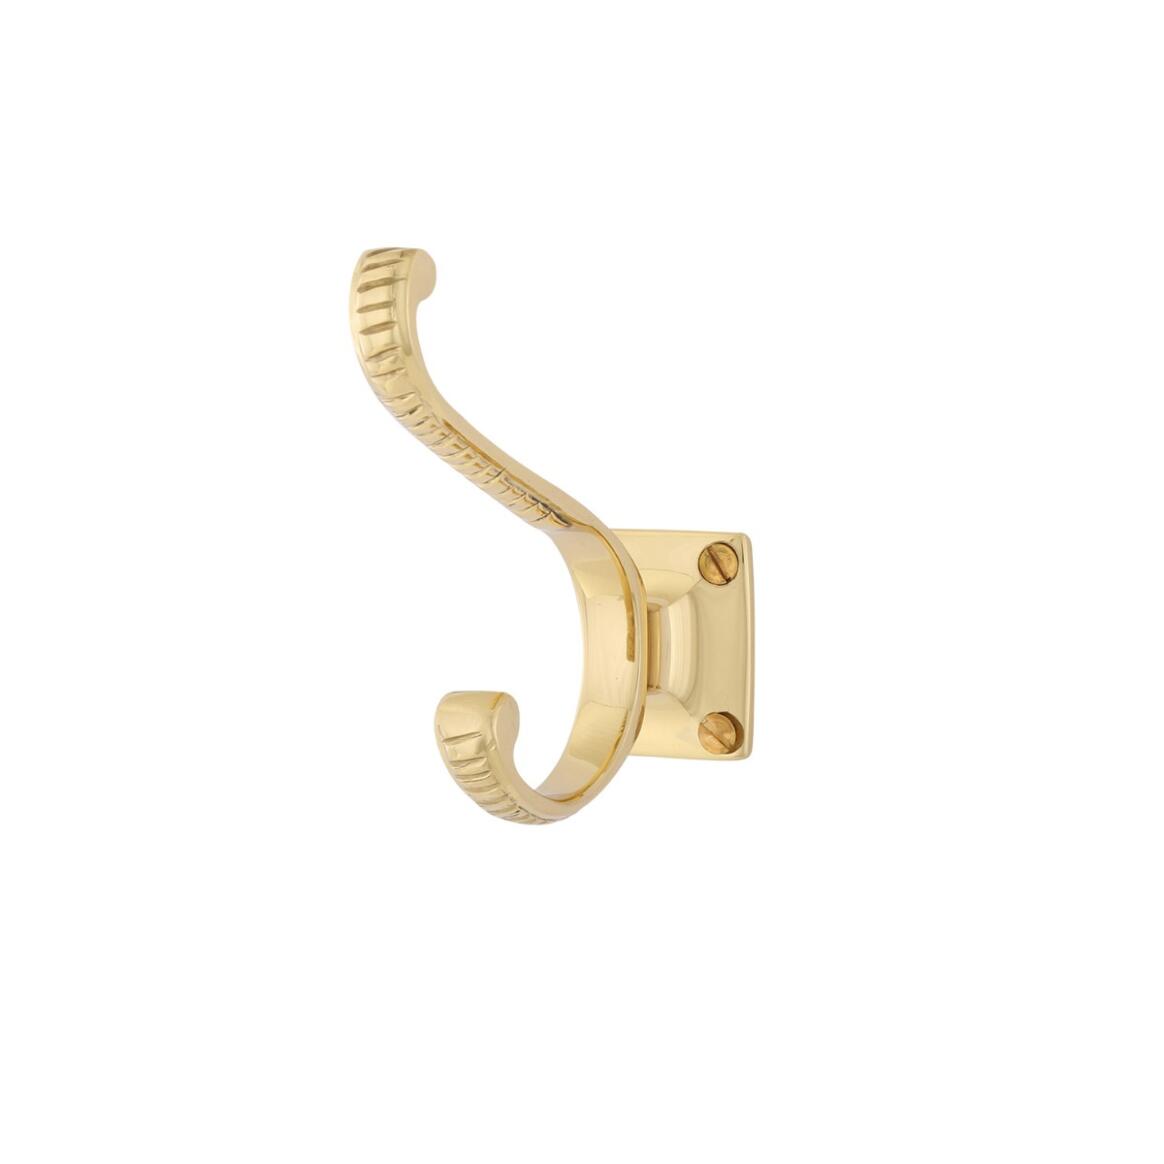 Bekan Brass Hat and Coat Hook 3.35x3.35" main product image